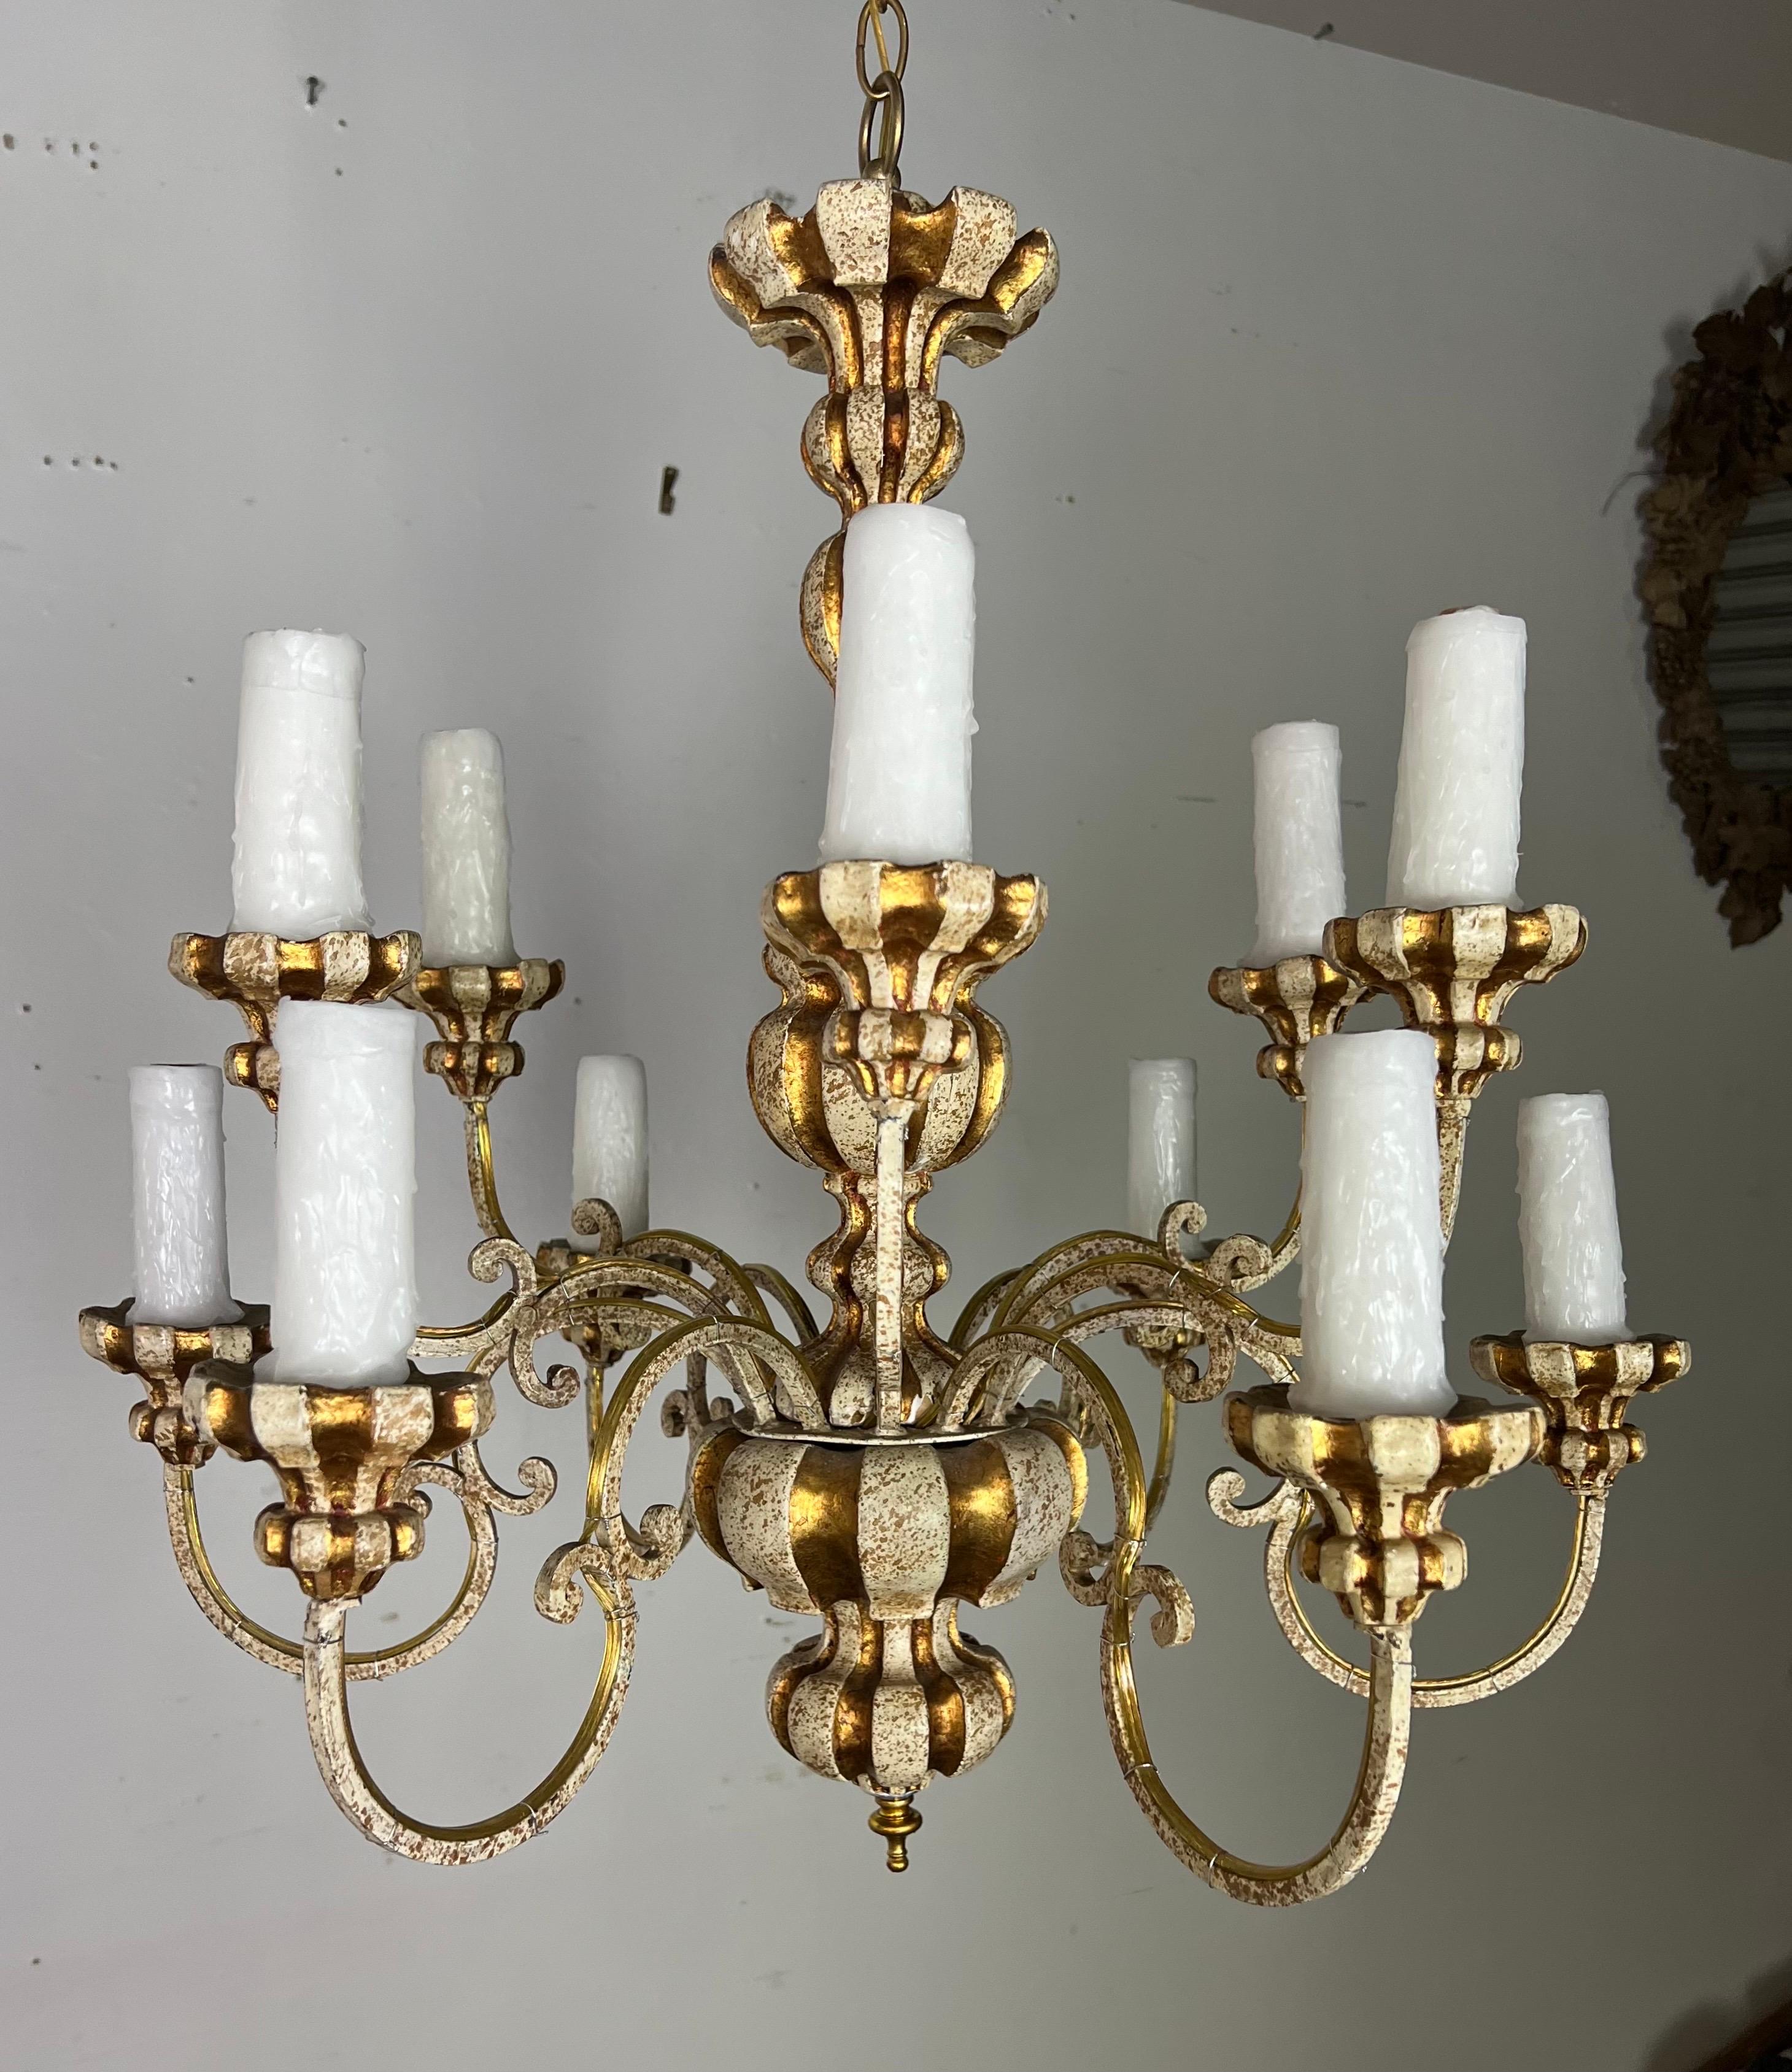 Italian 12 light 1930's Italian Rococo-style chandelier.  It features a cream painted finish with gold leaf accents. The chandelier is newly rewired and includes chain & canopy.